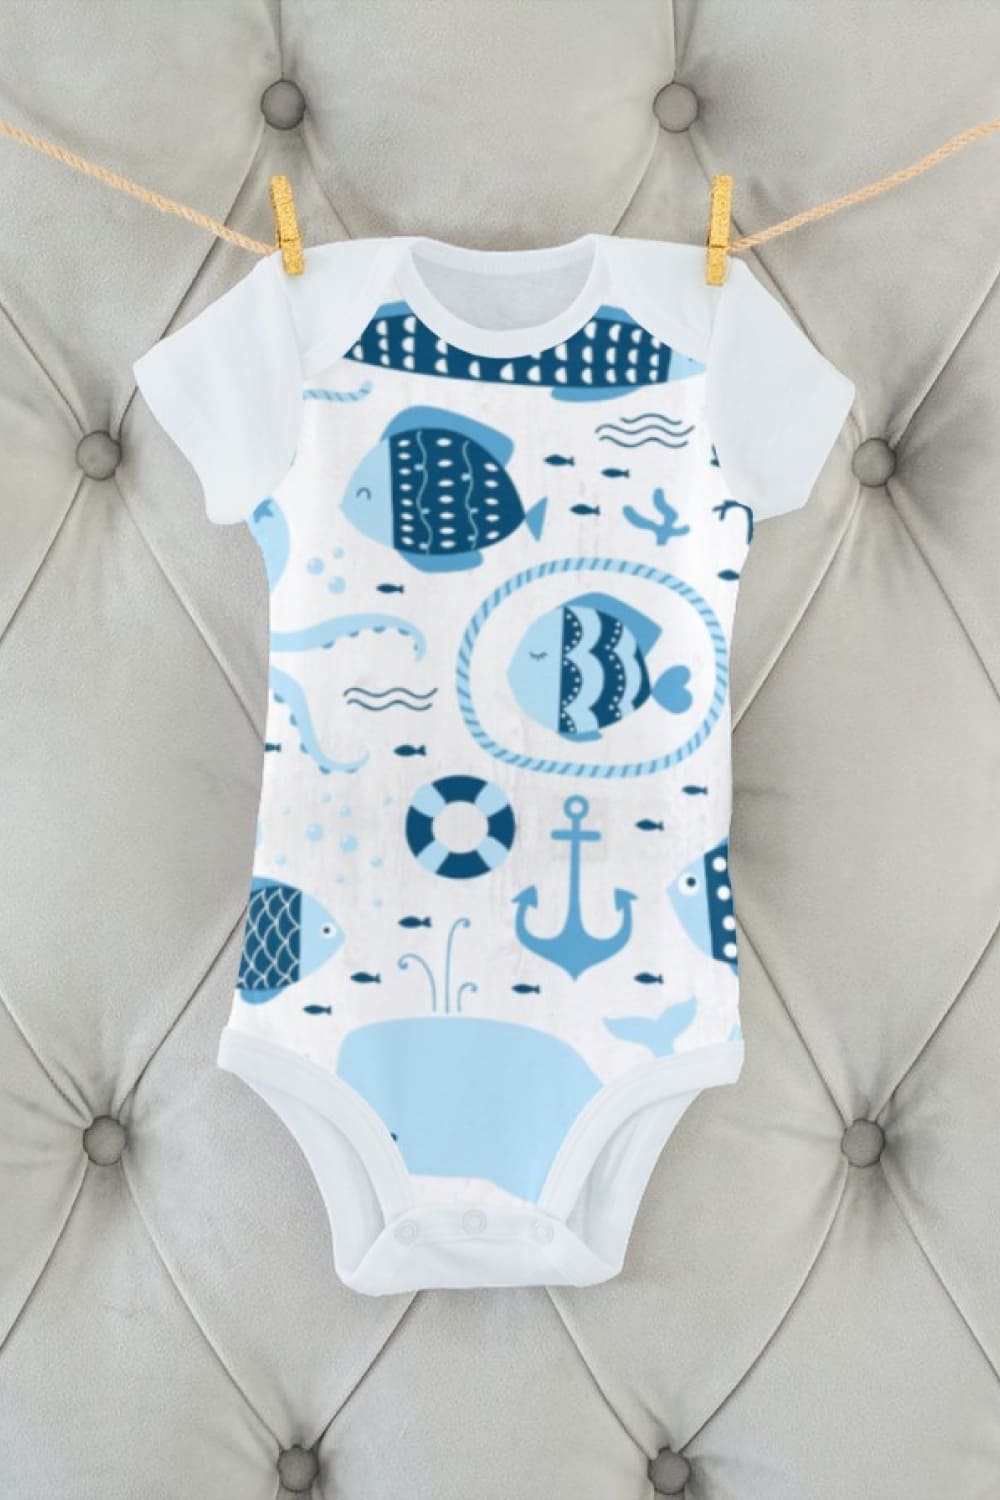 Your baby will definitely love this design.